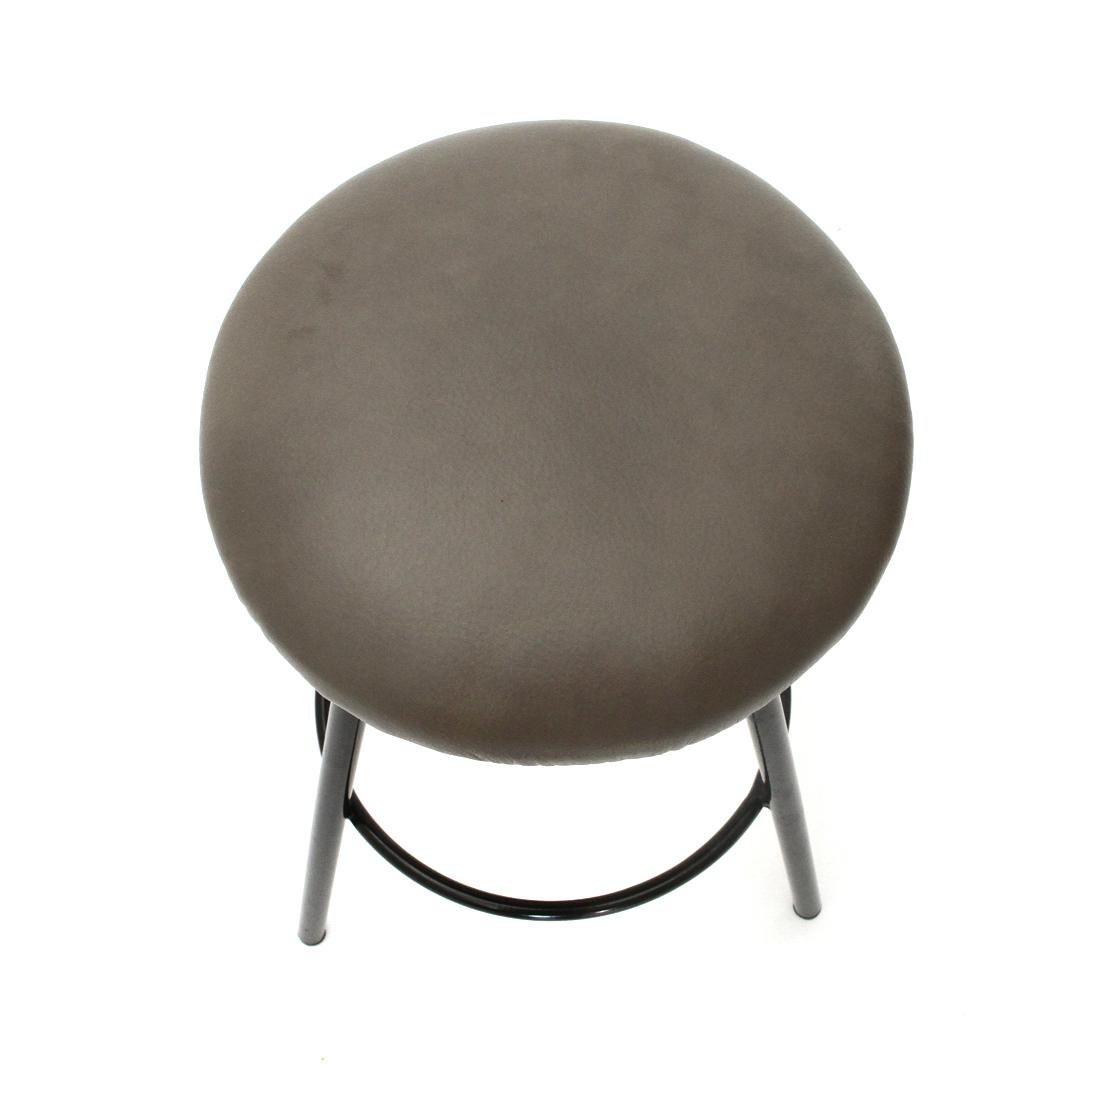 Mid-20th Century Metal Stool with Padded Seat, 1960s For Sale